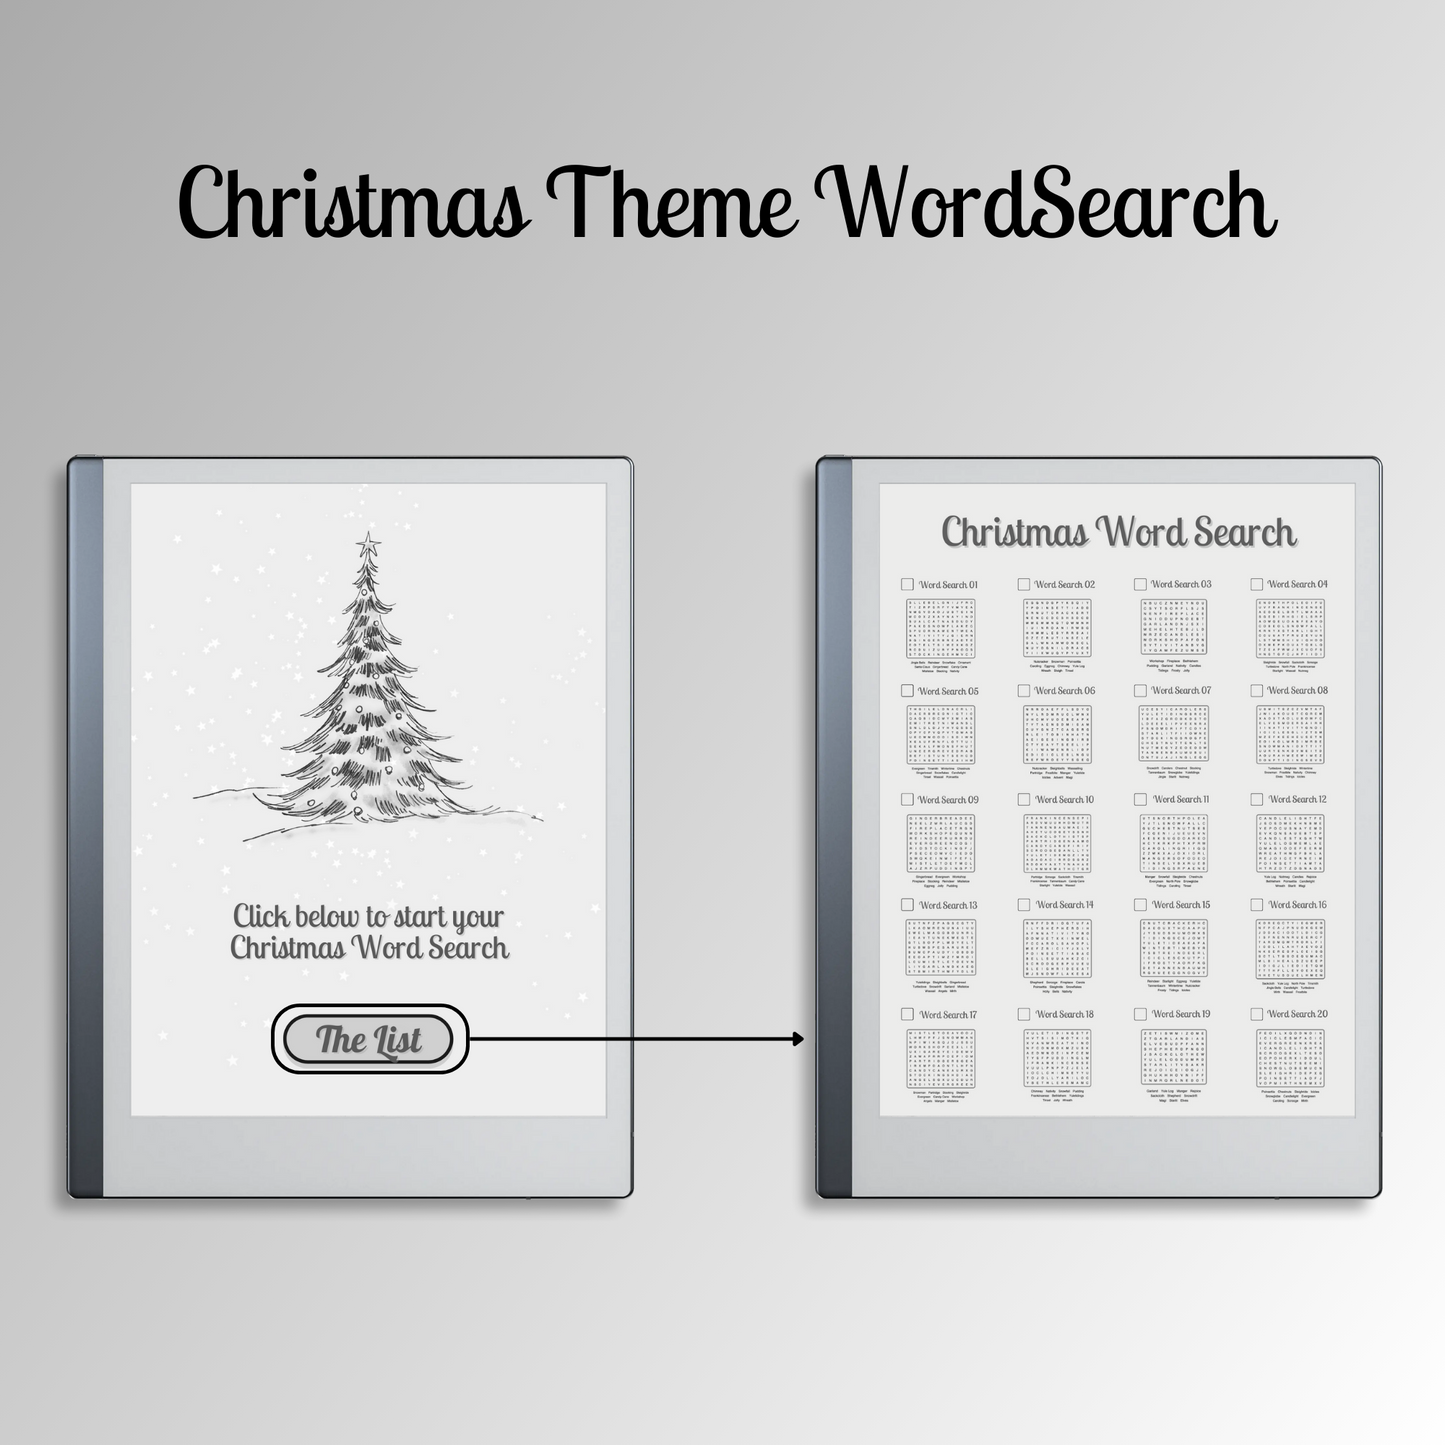 Remarkable 2 Christmas Word Search with easy navigations.